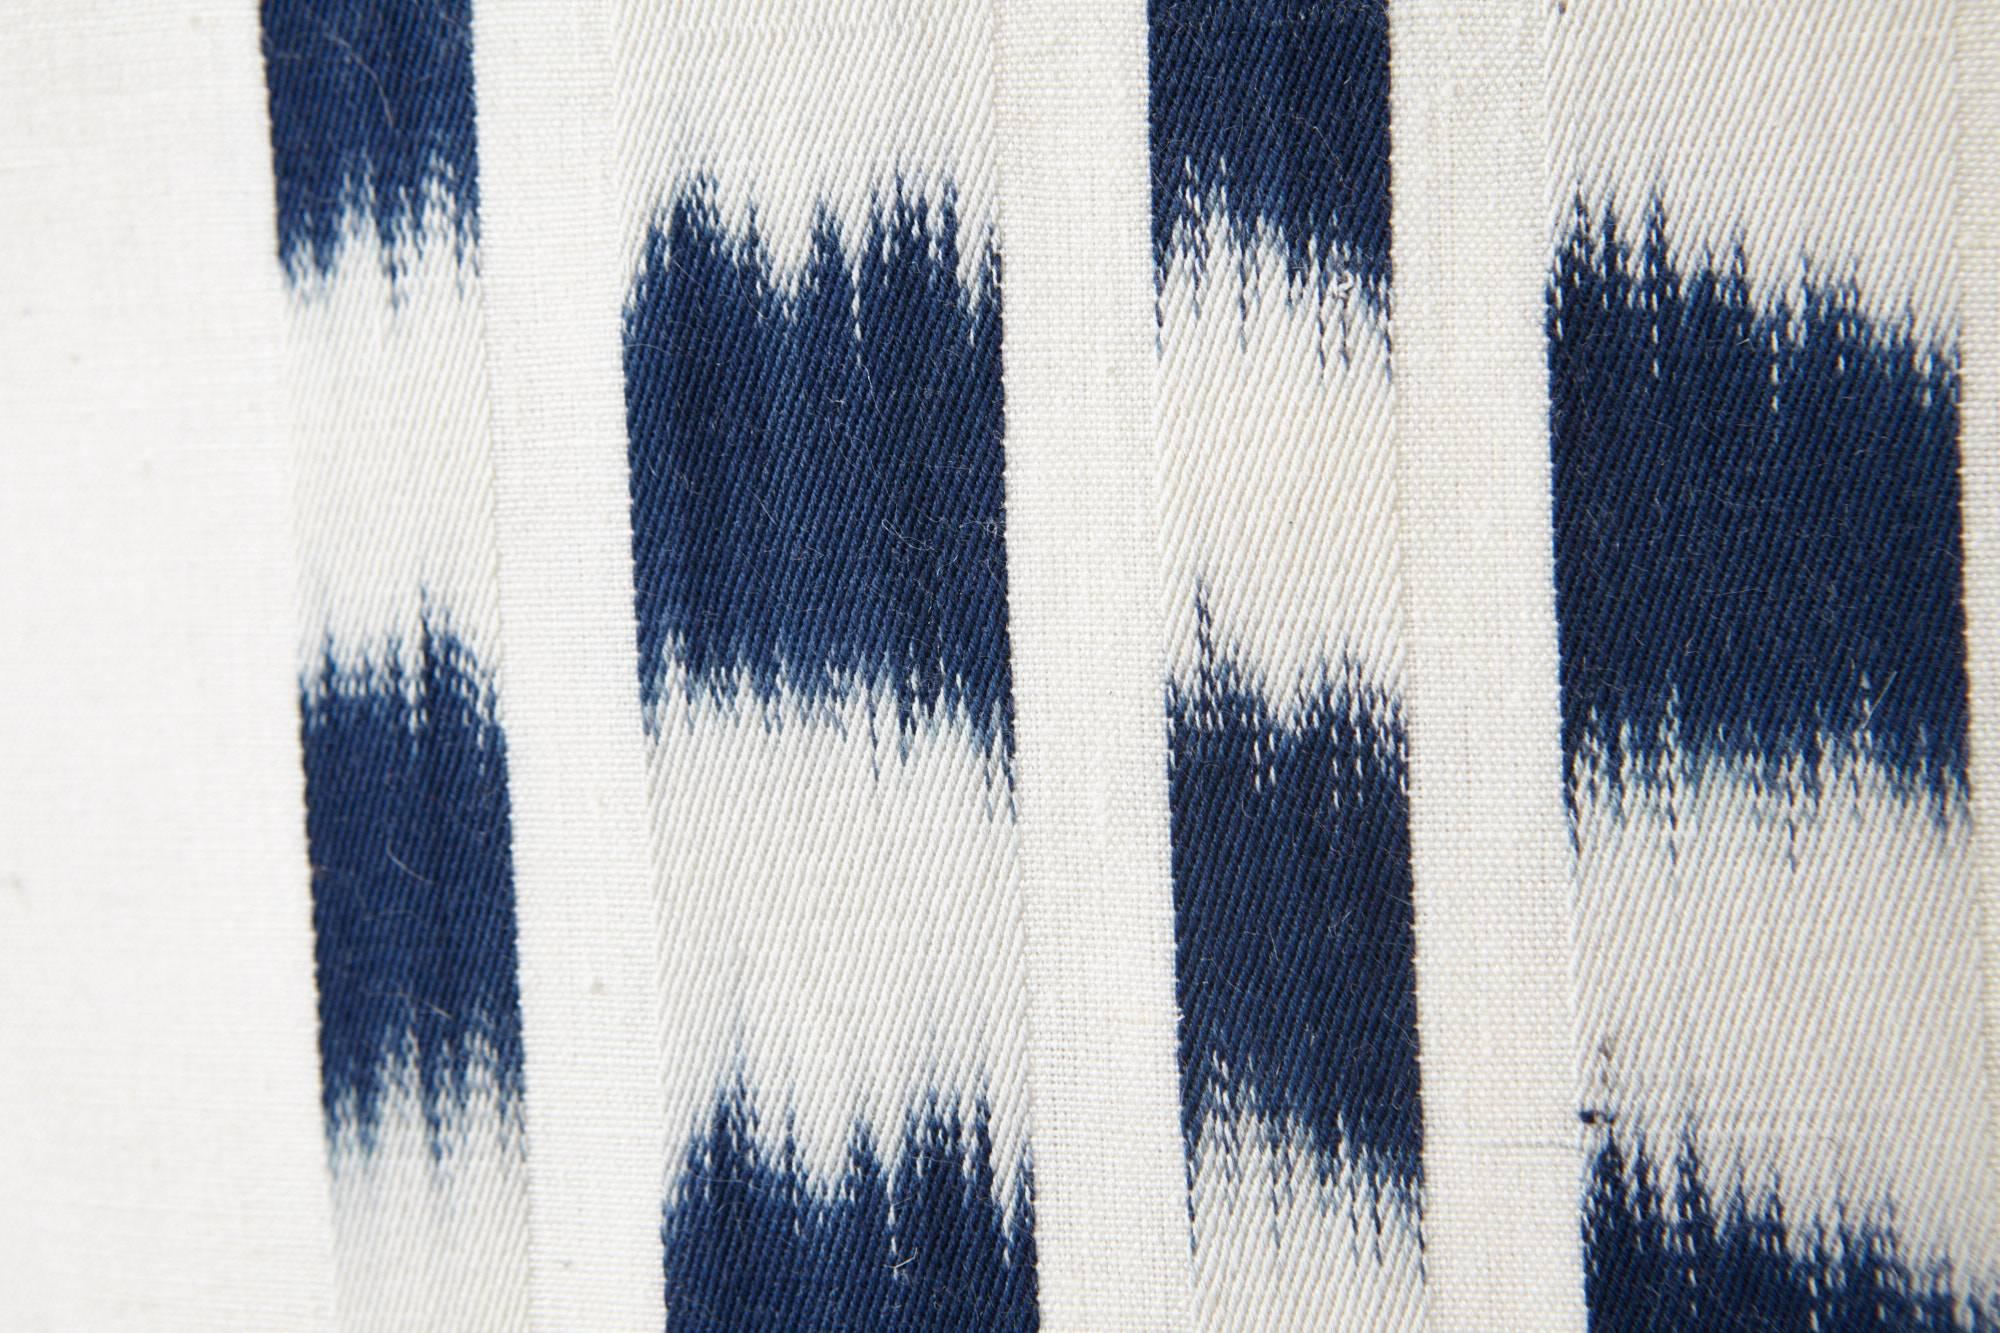 Using a traditional, artisanal weaving technique, this Schumacher Izmir Stripe Ikat is intentionally irregular, emphasizing the art of the hand. Subtle variations are part of its inherent beauty. Featured as an oversized decorative accent, this is